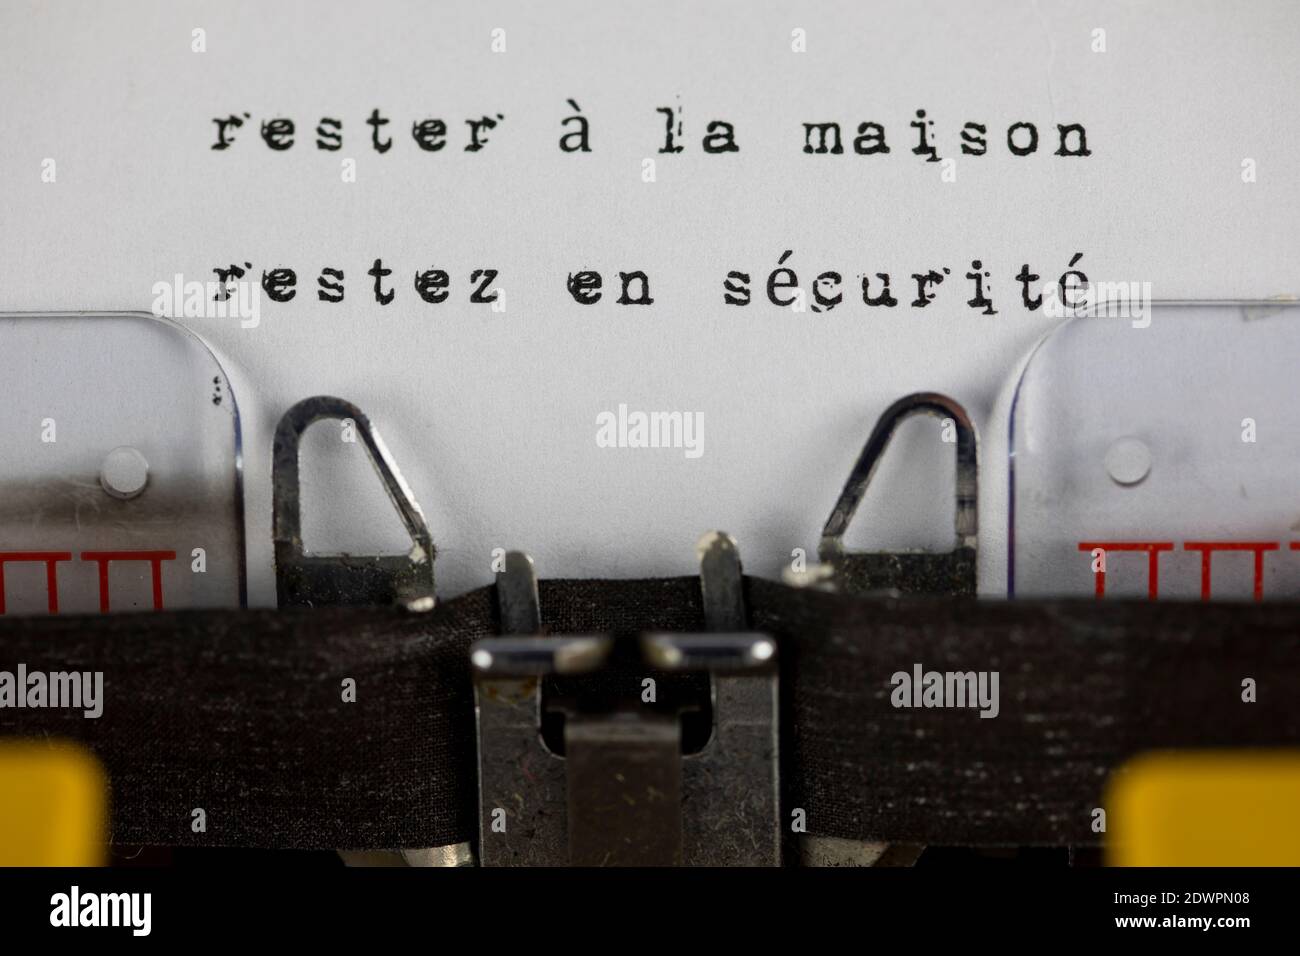 rester à la maison, restez en securite ( stay home, stay safe) written on an old typewriter Stock Photo